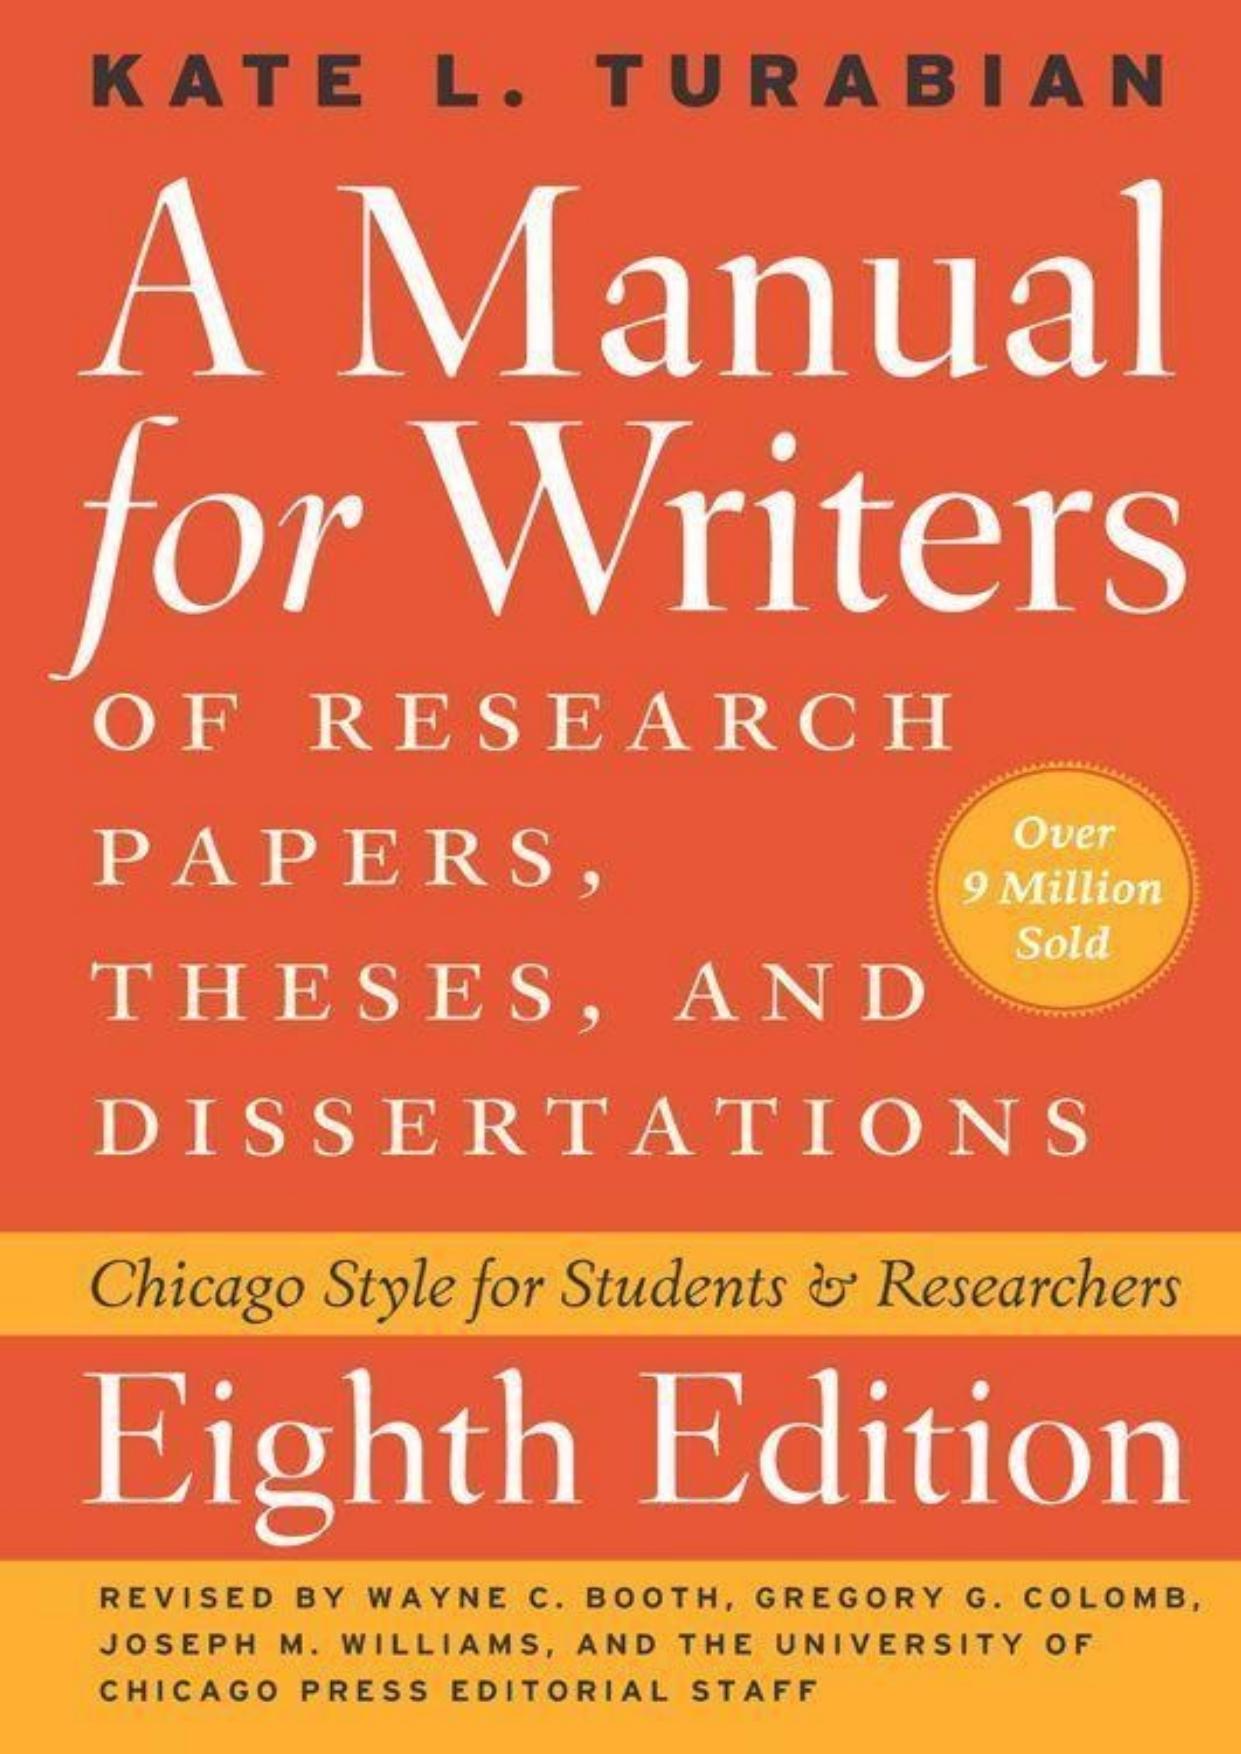 A Manual for Writers of Research Papers, Theses, and Dissertations, Eighth Edition: Chicago Style for Students and Researchers (Chicago Guides to Writing, Editing, and)